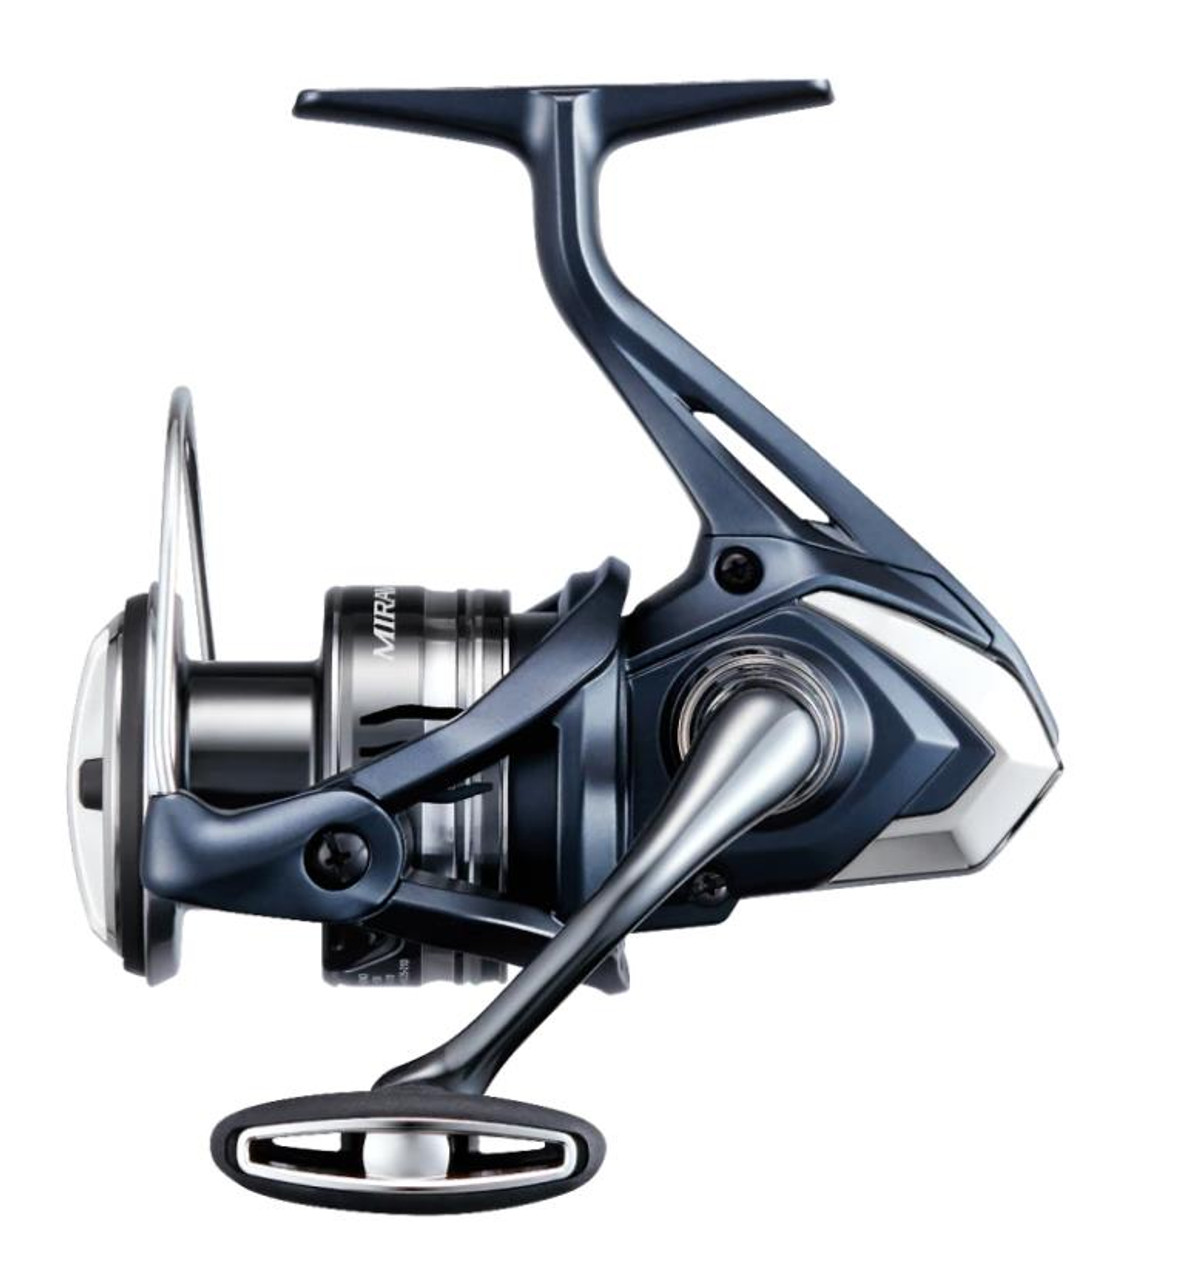 https://cdn11.bigcommerce.com/s-0xmhwue6/images/stencil/1280x1280/products/24341/56630/Shimano-Miravel-Spinning-Reel-1000-5-0-1-022255269131_image1__65852.1675437971.jpg?c=2